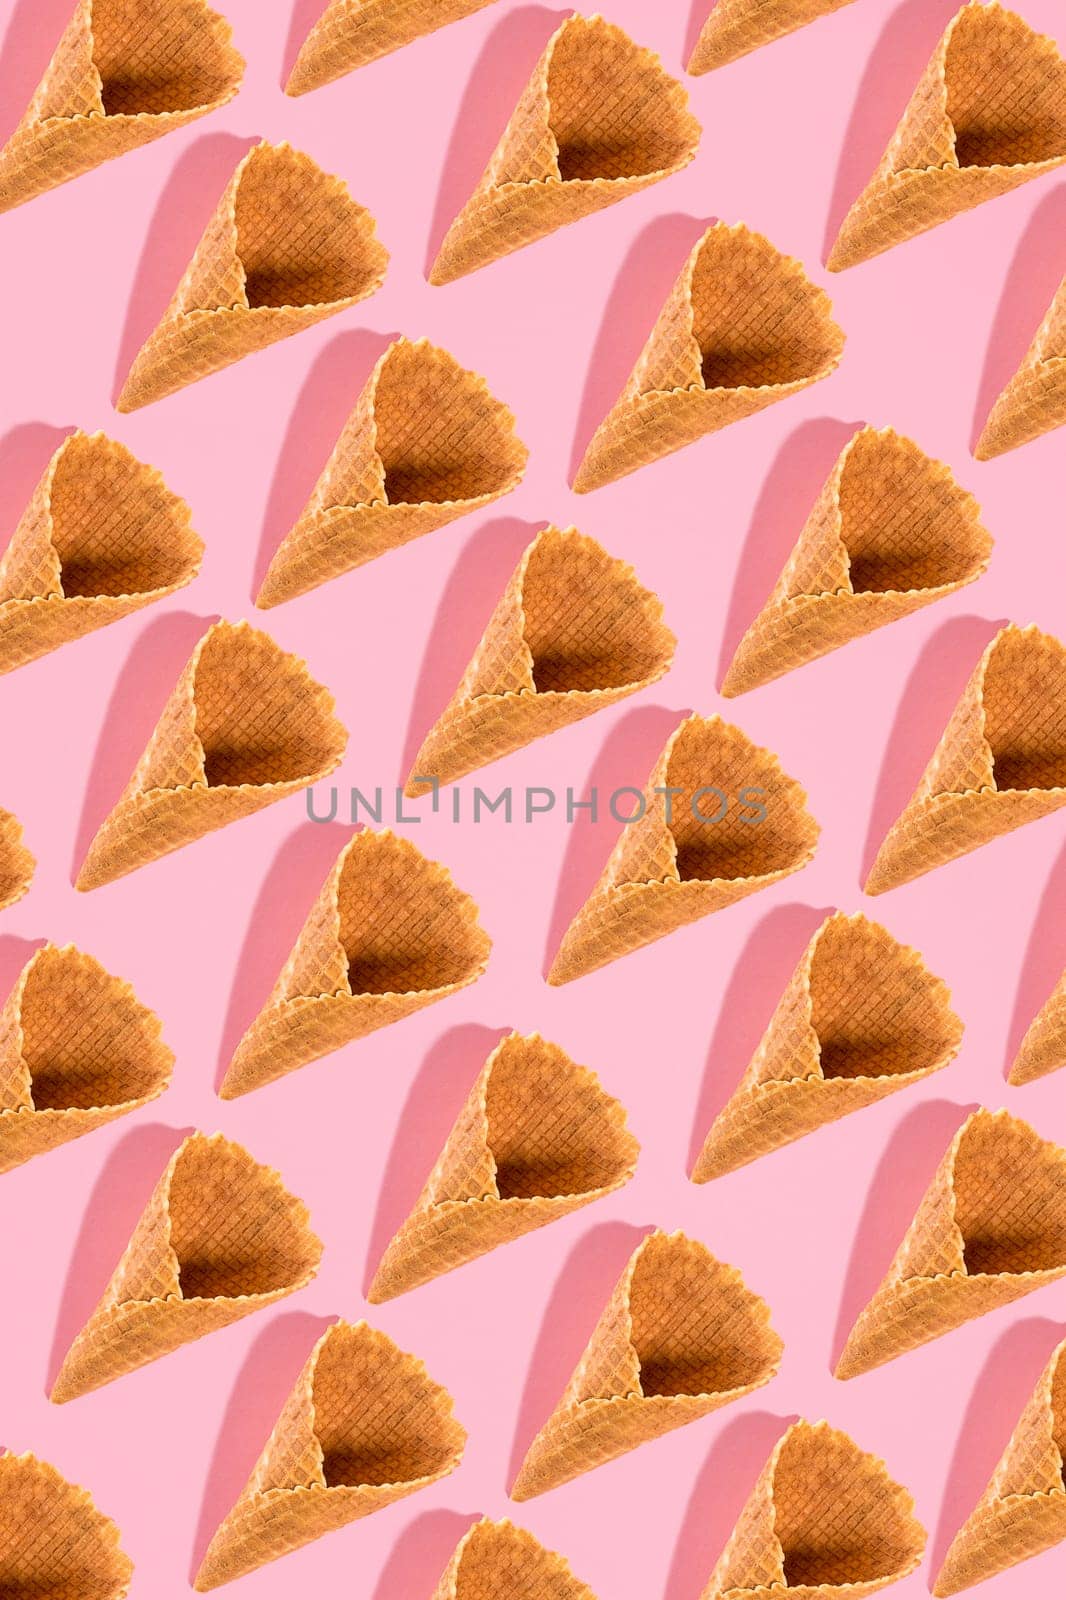 Sugar waffle cone for ice cream arranged in pattern on pink background. The image with copy space can be used as a background for the design of the confectionery menu, cards, greetings, invitations, pattern